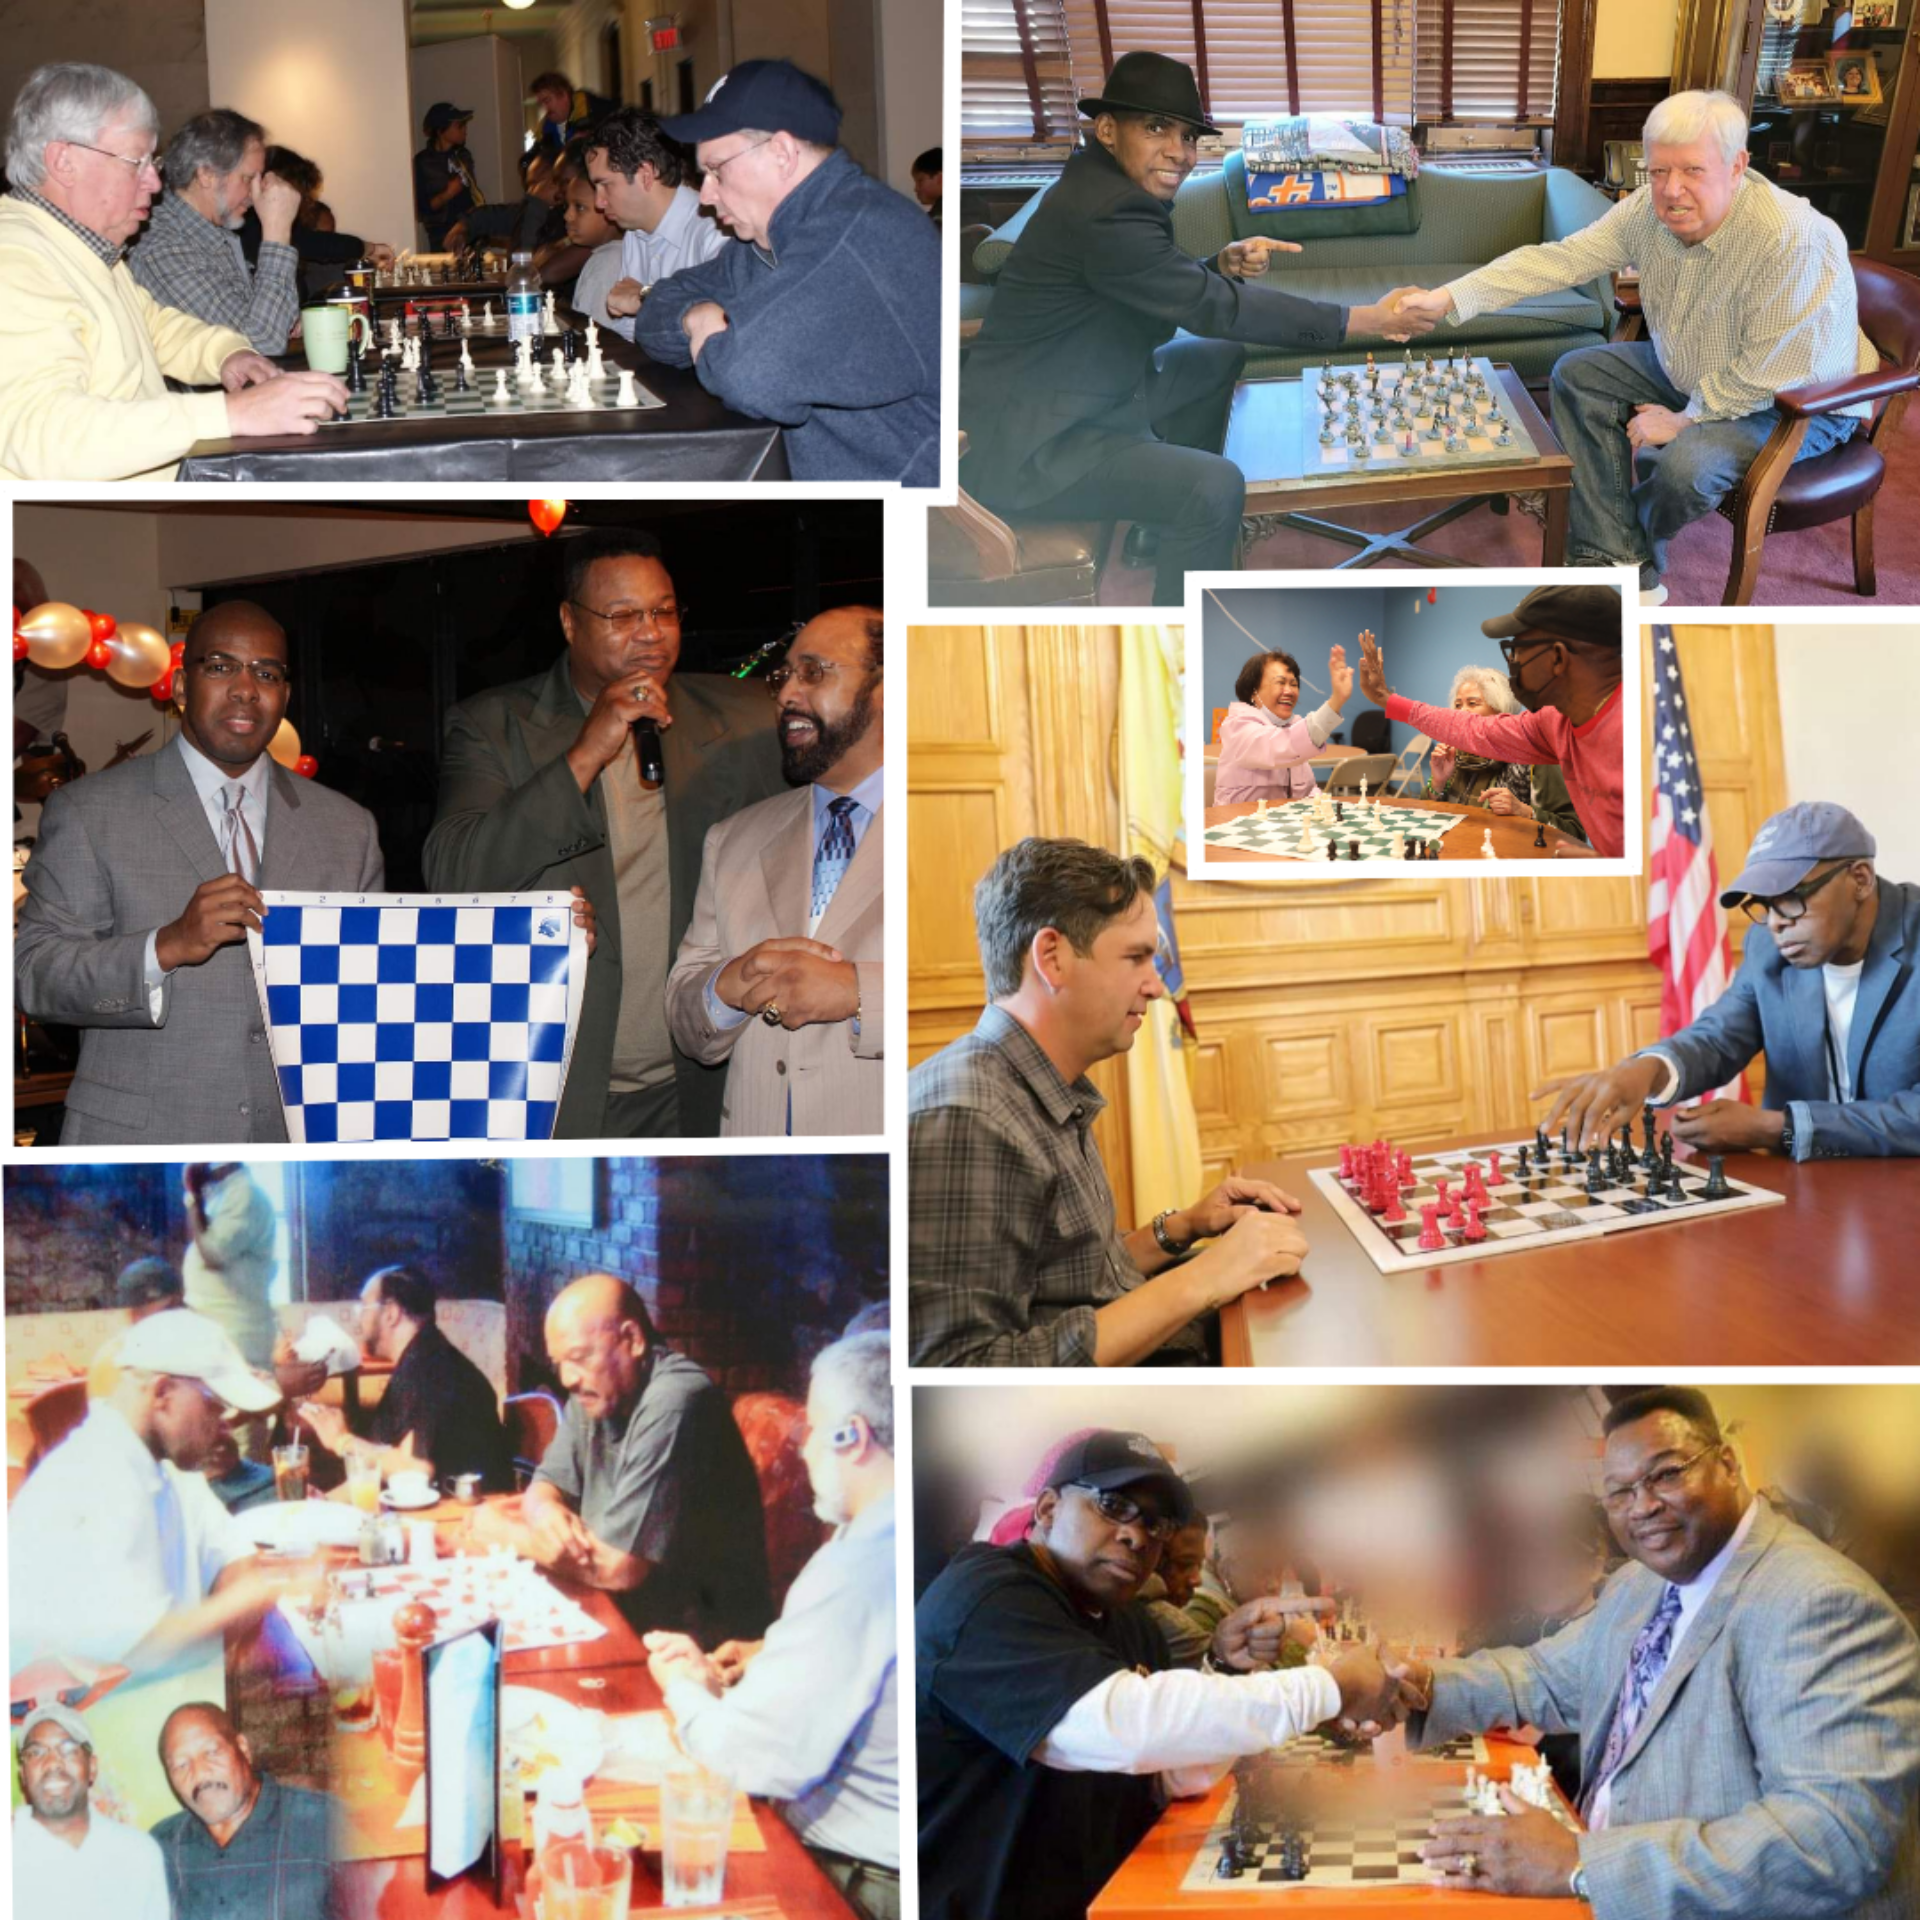 Promoting chess and mental health with seniors, celebrities and public officials.